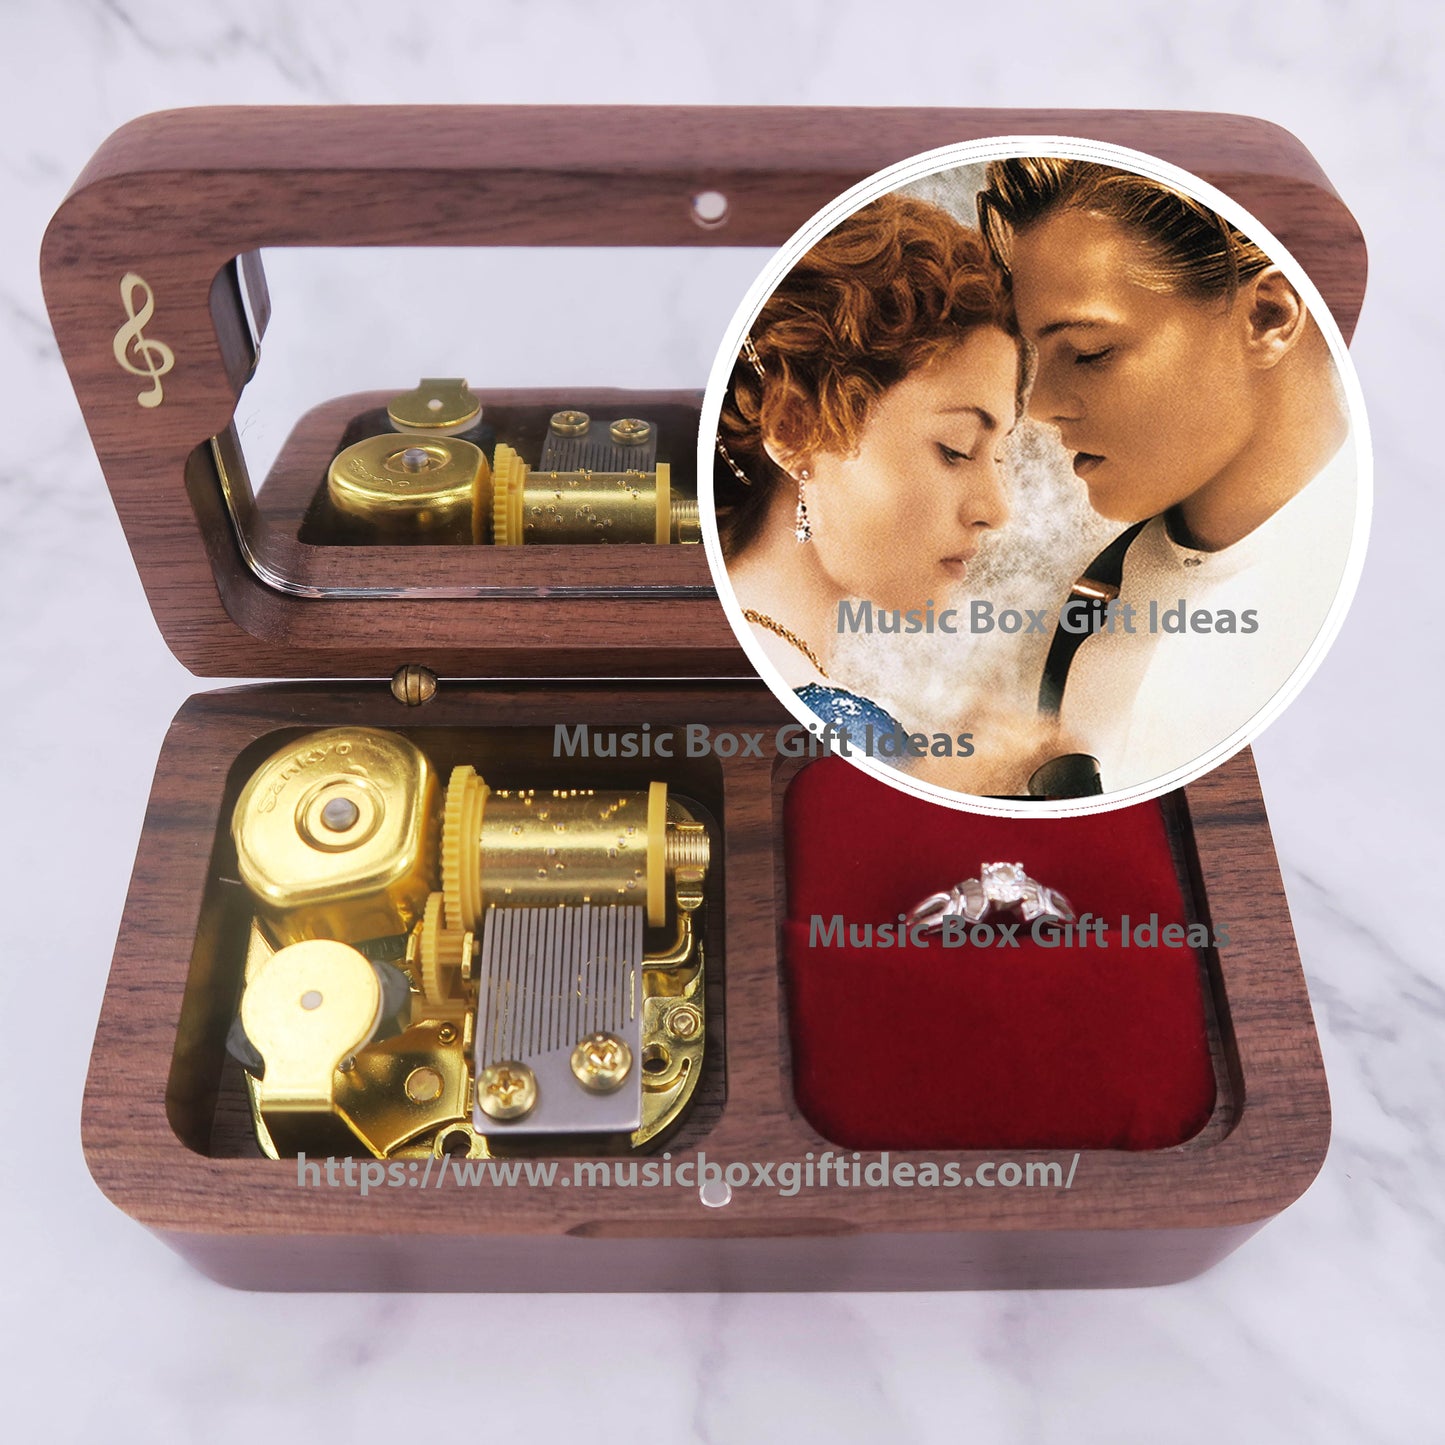 Movie Soundtrack Titanic My Heart Will Go On Celin Dion 18-Note Jewelry Music Box Gift (Wooden Clockwork) - Music Box Gift Ideas